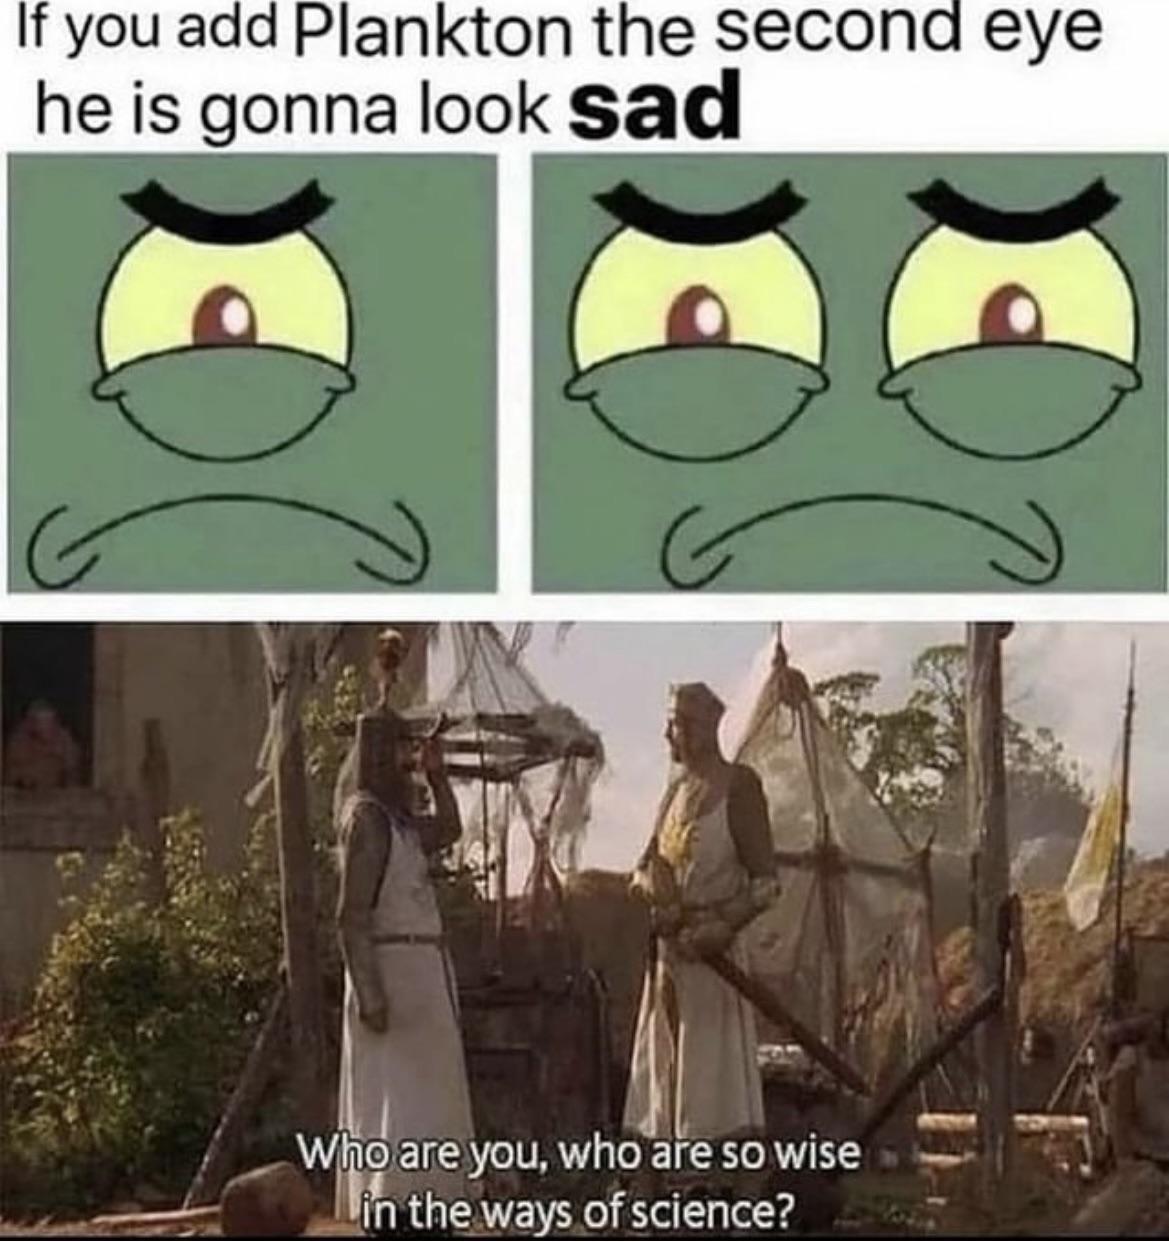 dank memes - funny memes - you so wise in the ways of science meme - If you add Plankton the second eye he is gonna look sad Who are you, who are so wise in the ways of science?